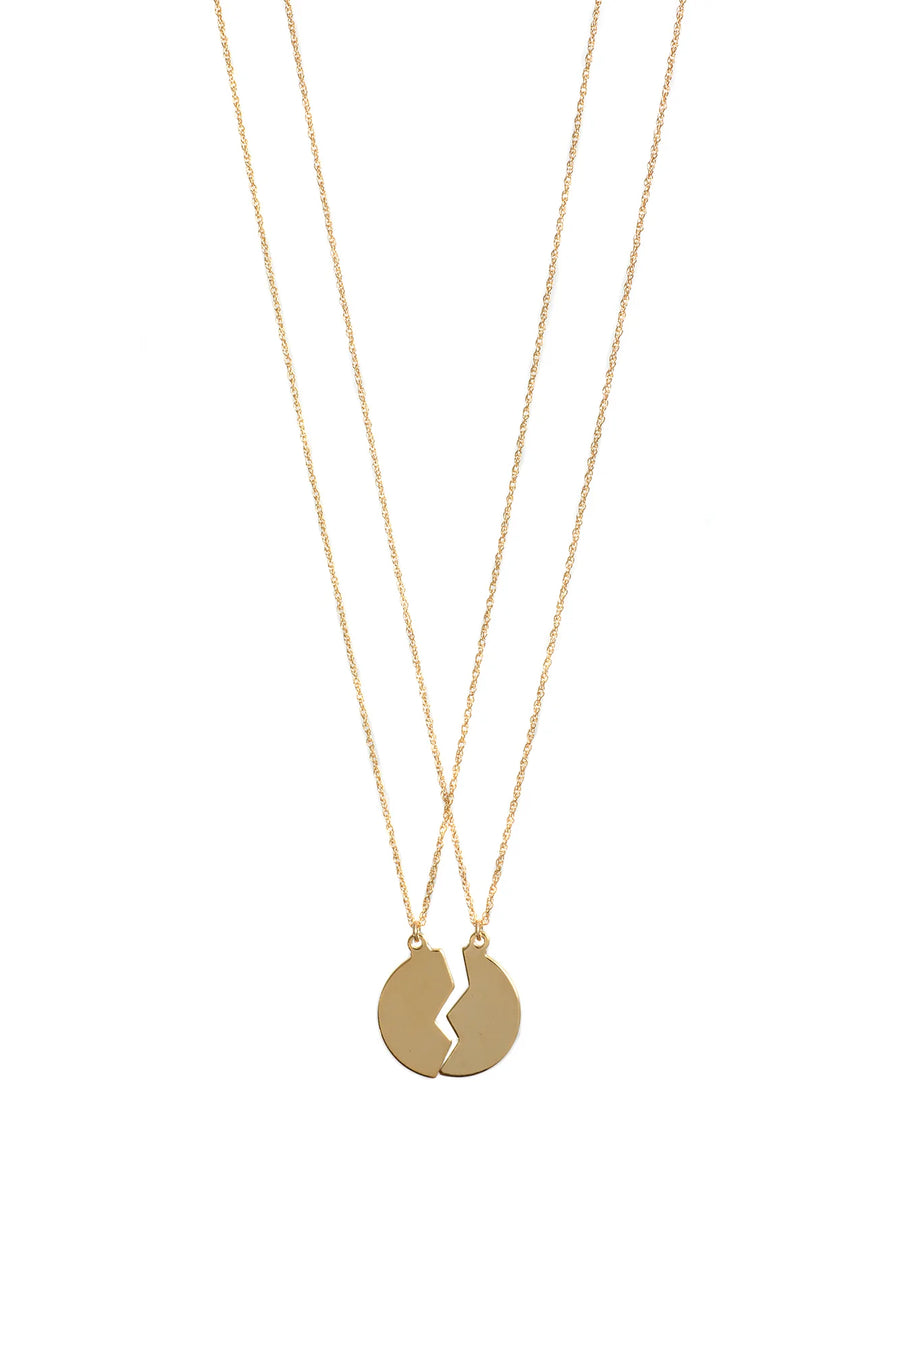 LISBETH JEWELRY - COLLIER DUO BFF - OR REMPLI